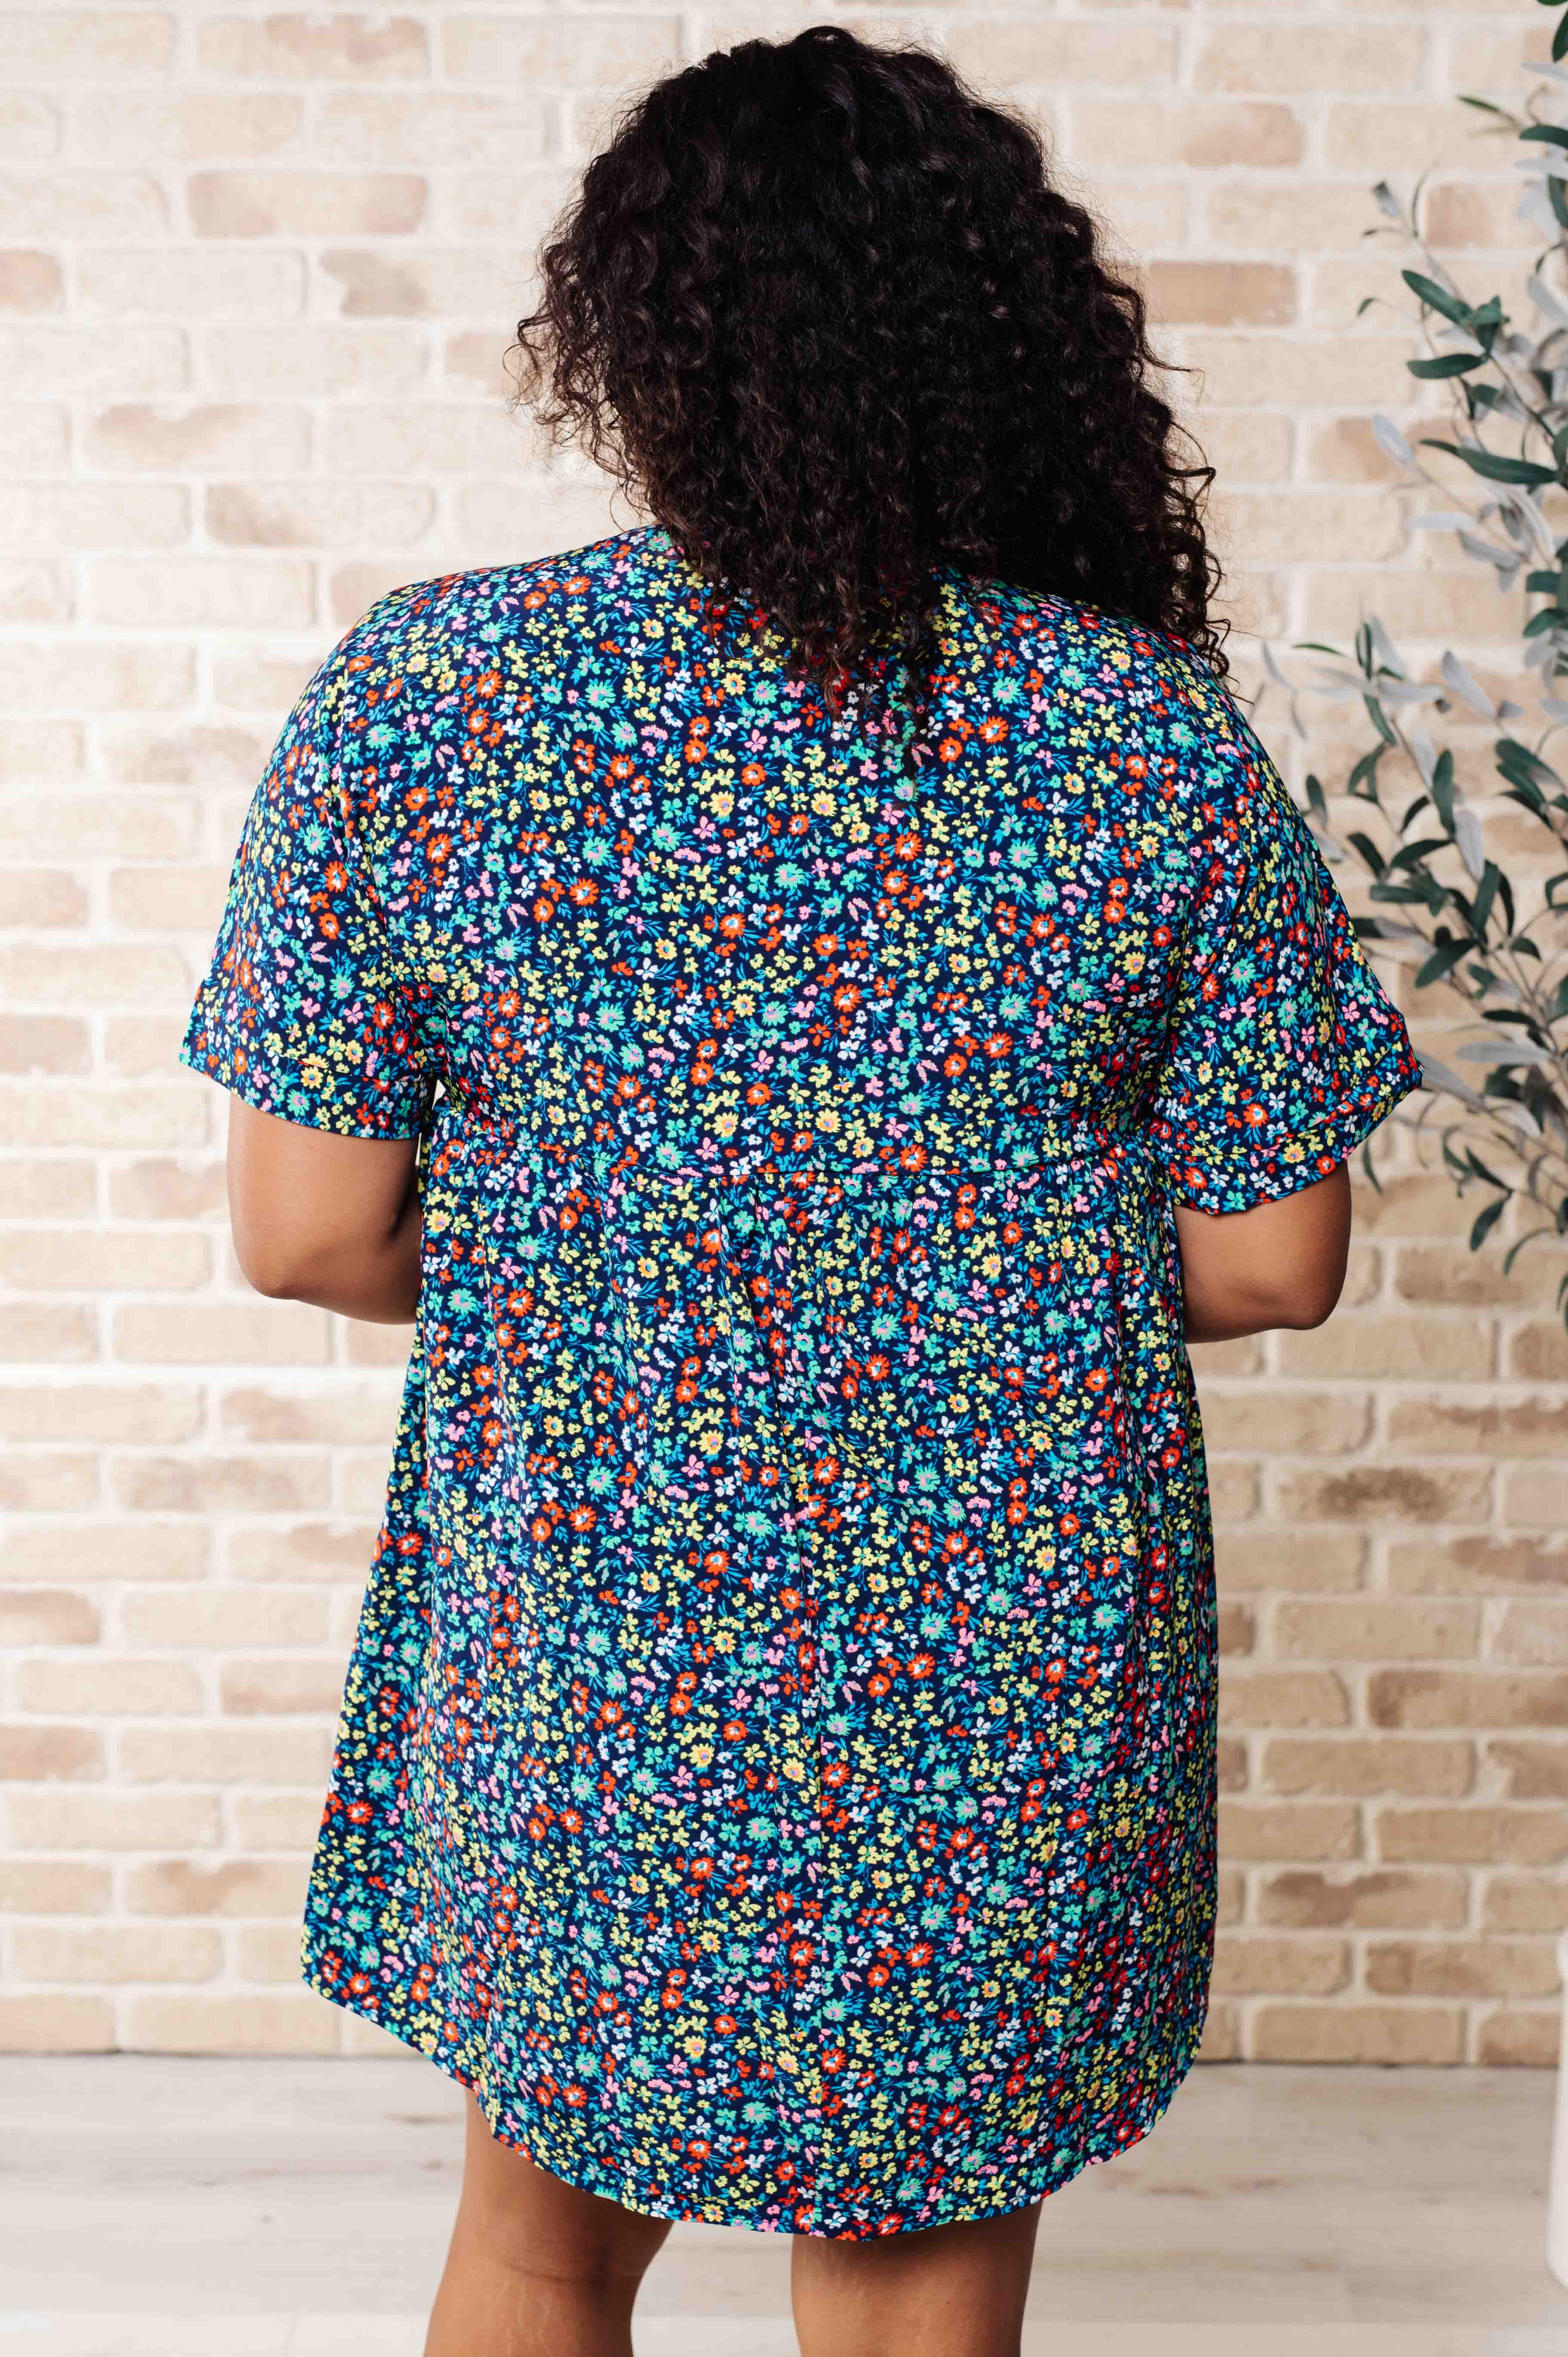 Emily Wonder What's the Hurry About? Floral Dress Ave Shops